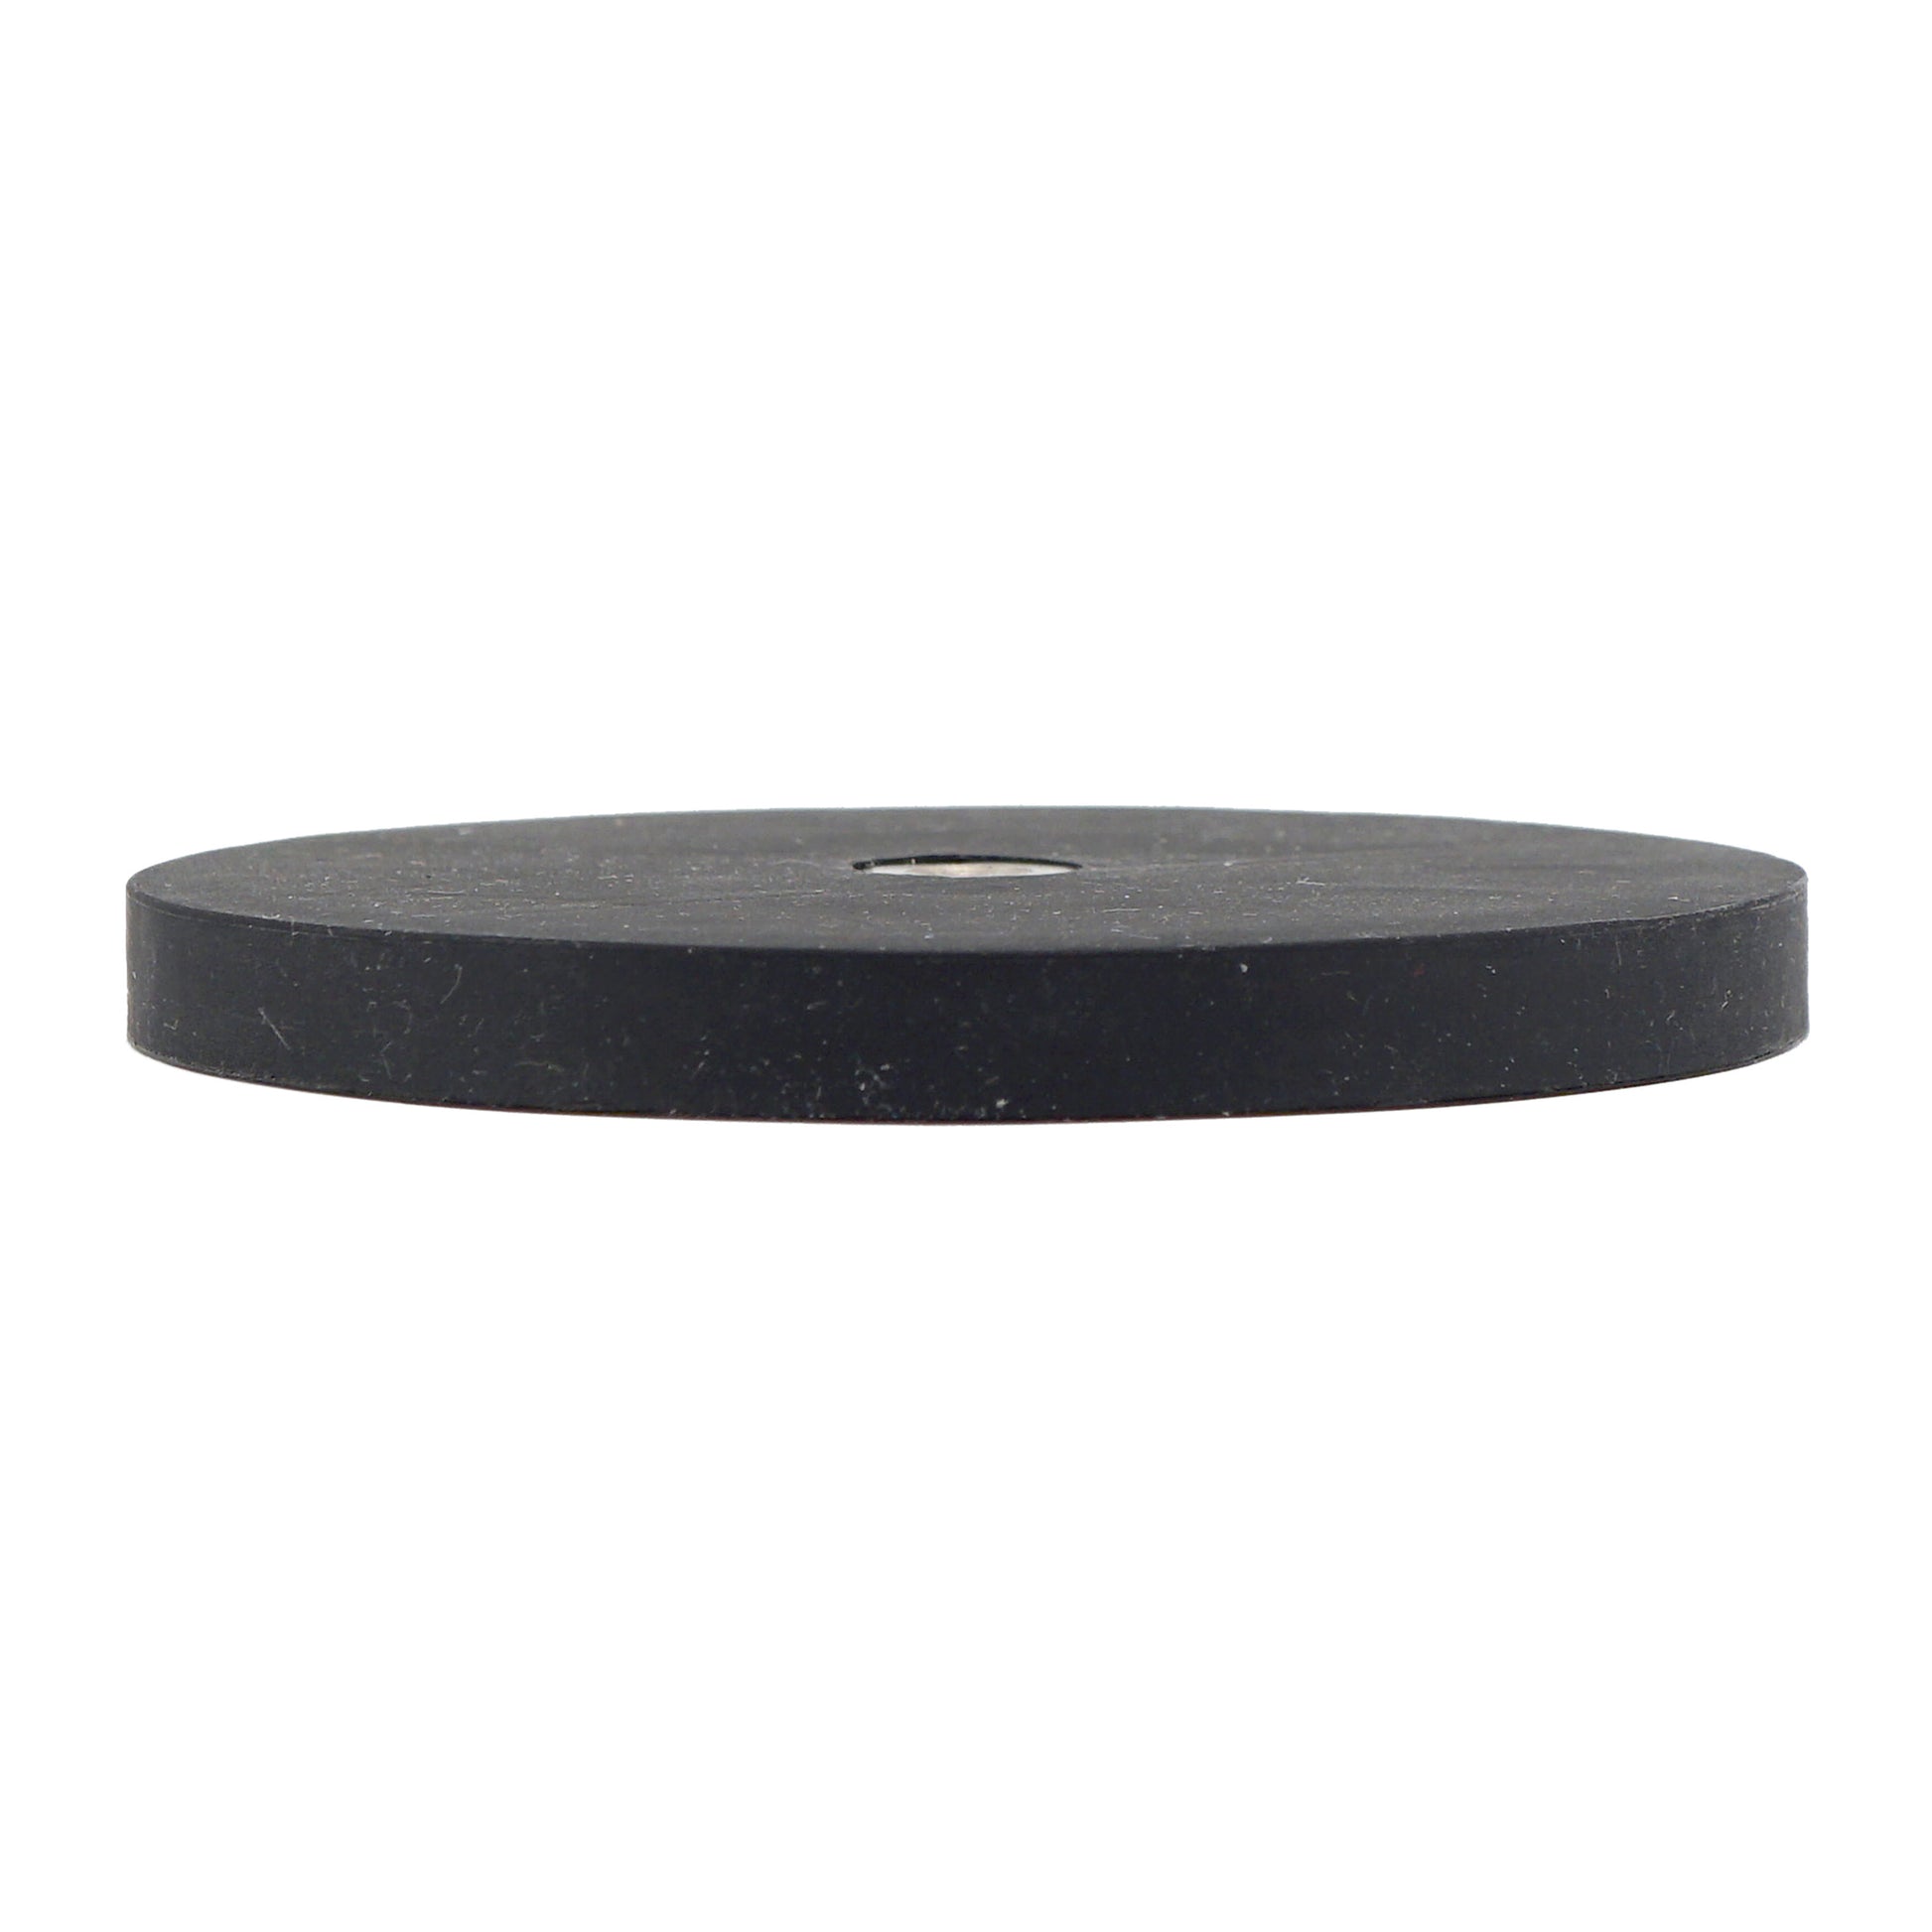 Load image into Gallery viewer, NADR351F Neodymium Rubber Coated Round Base Magnet with Female Thread - Side View